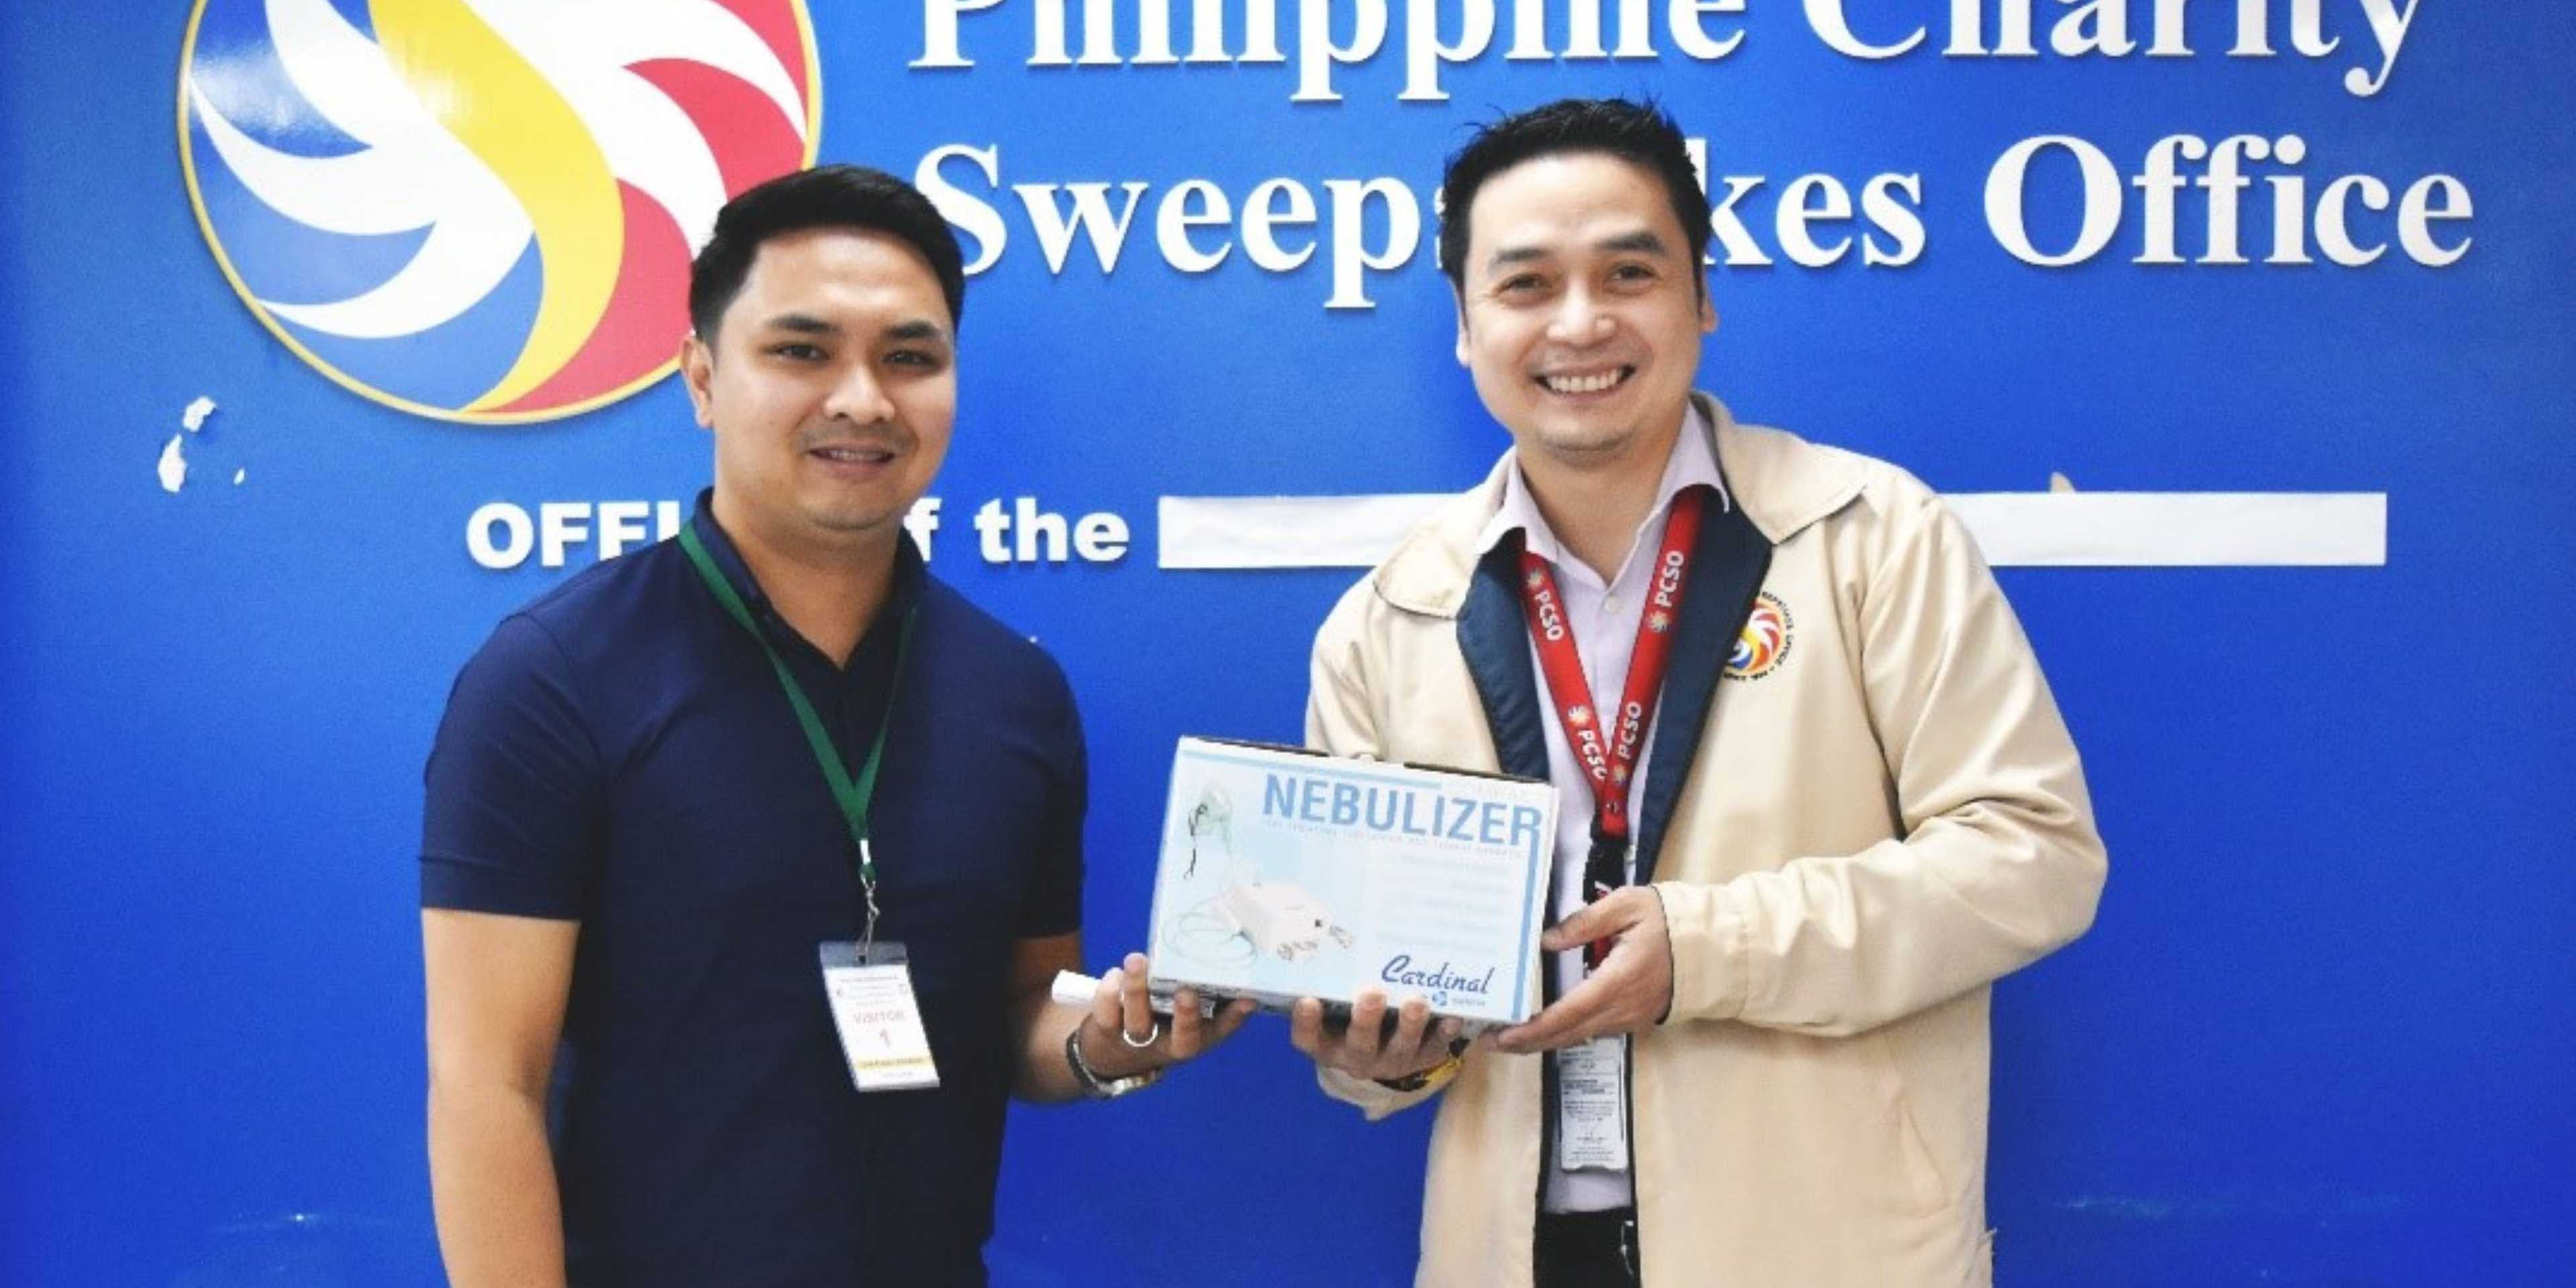 Luisiana, Laguna receives 25 nebulizers from PCSO to aid elderly residents